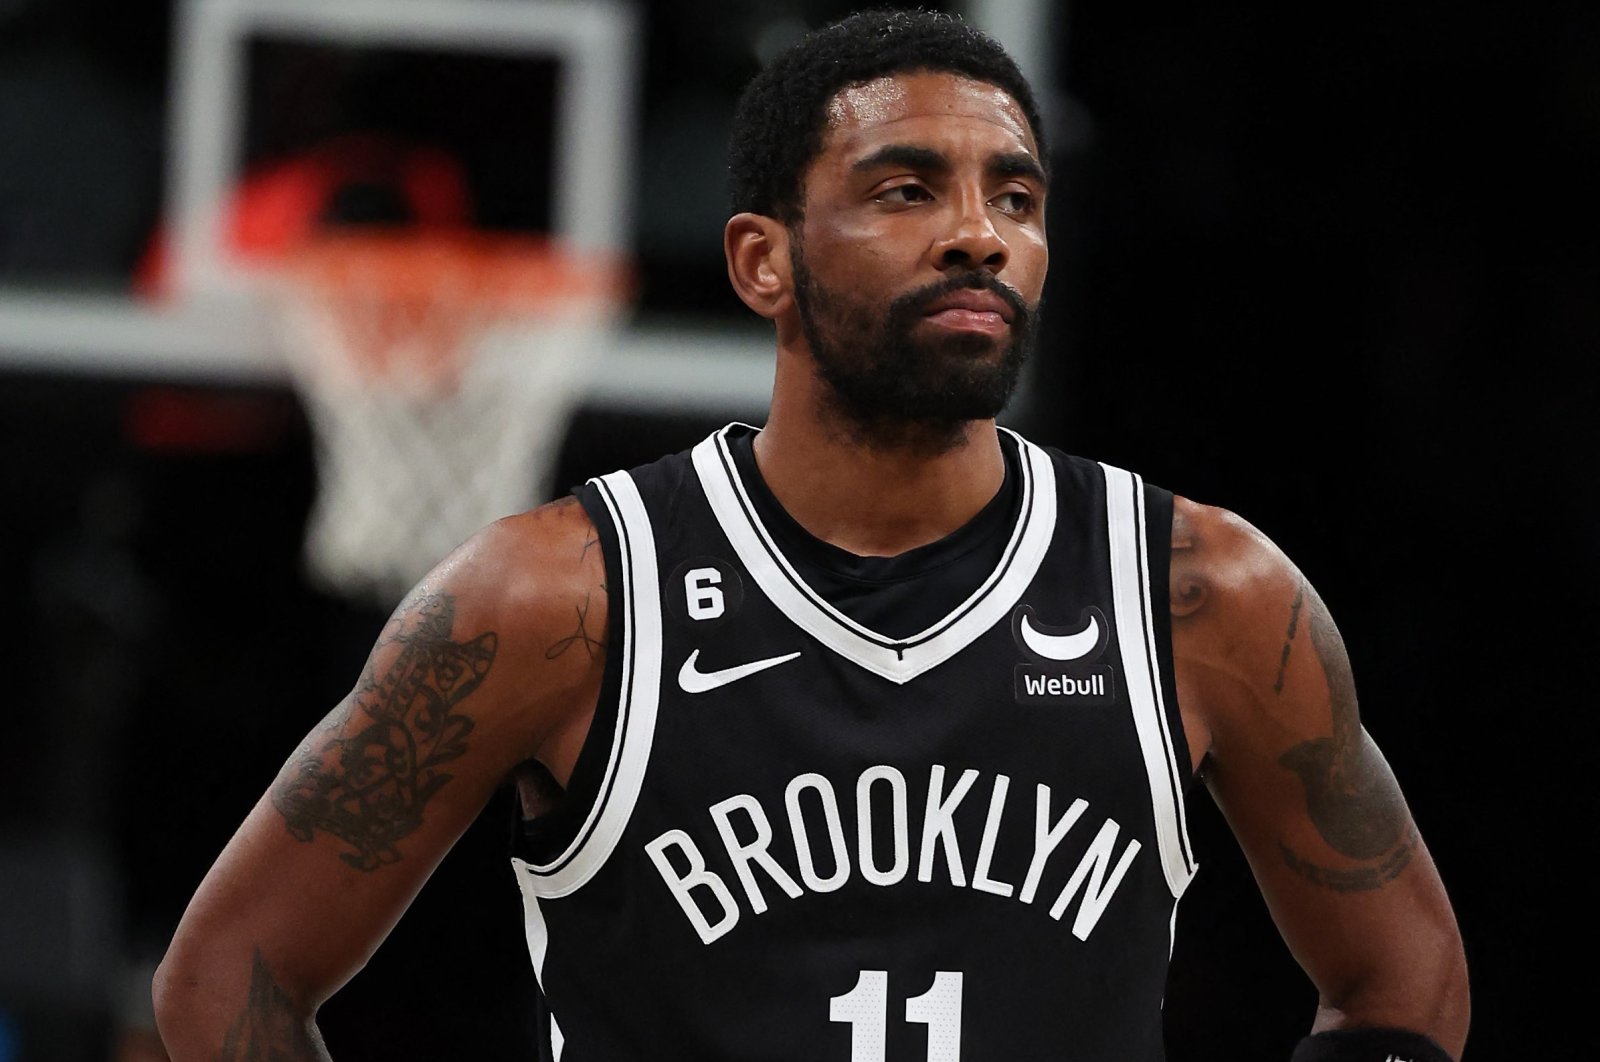 Nets Kyrie Irving looks on against the Wizards during an NBA game, New York, U.S., Dec. 5, 2022. (AFP Photo)